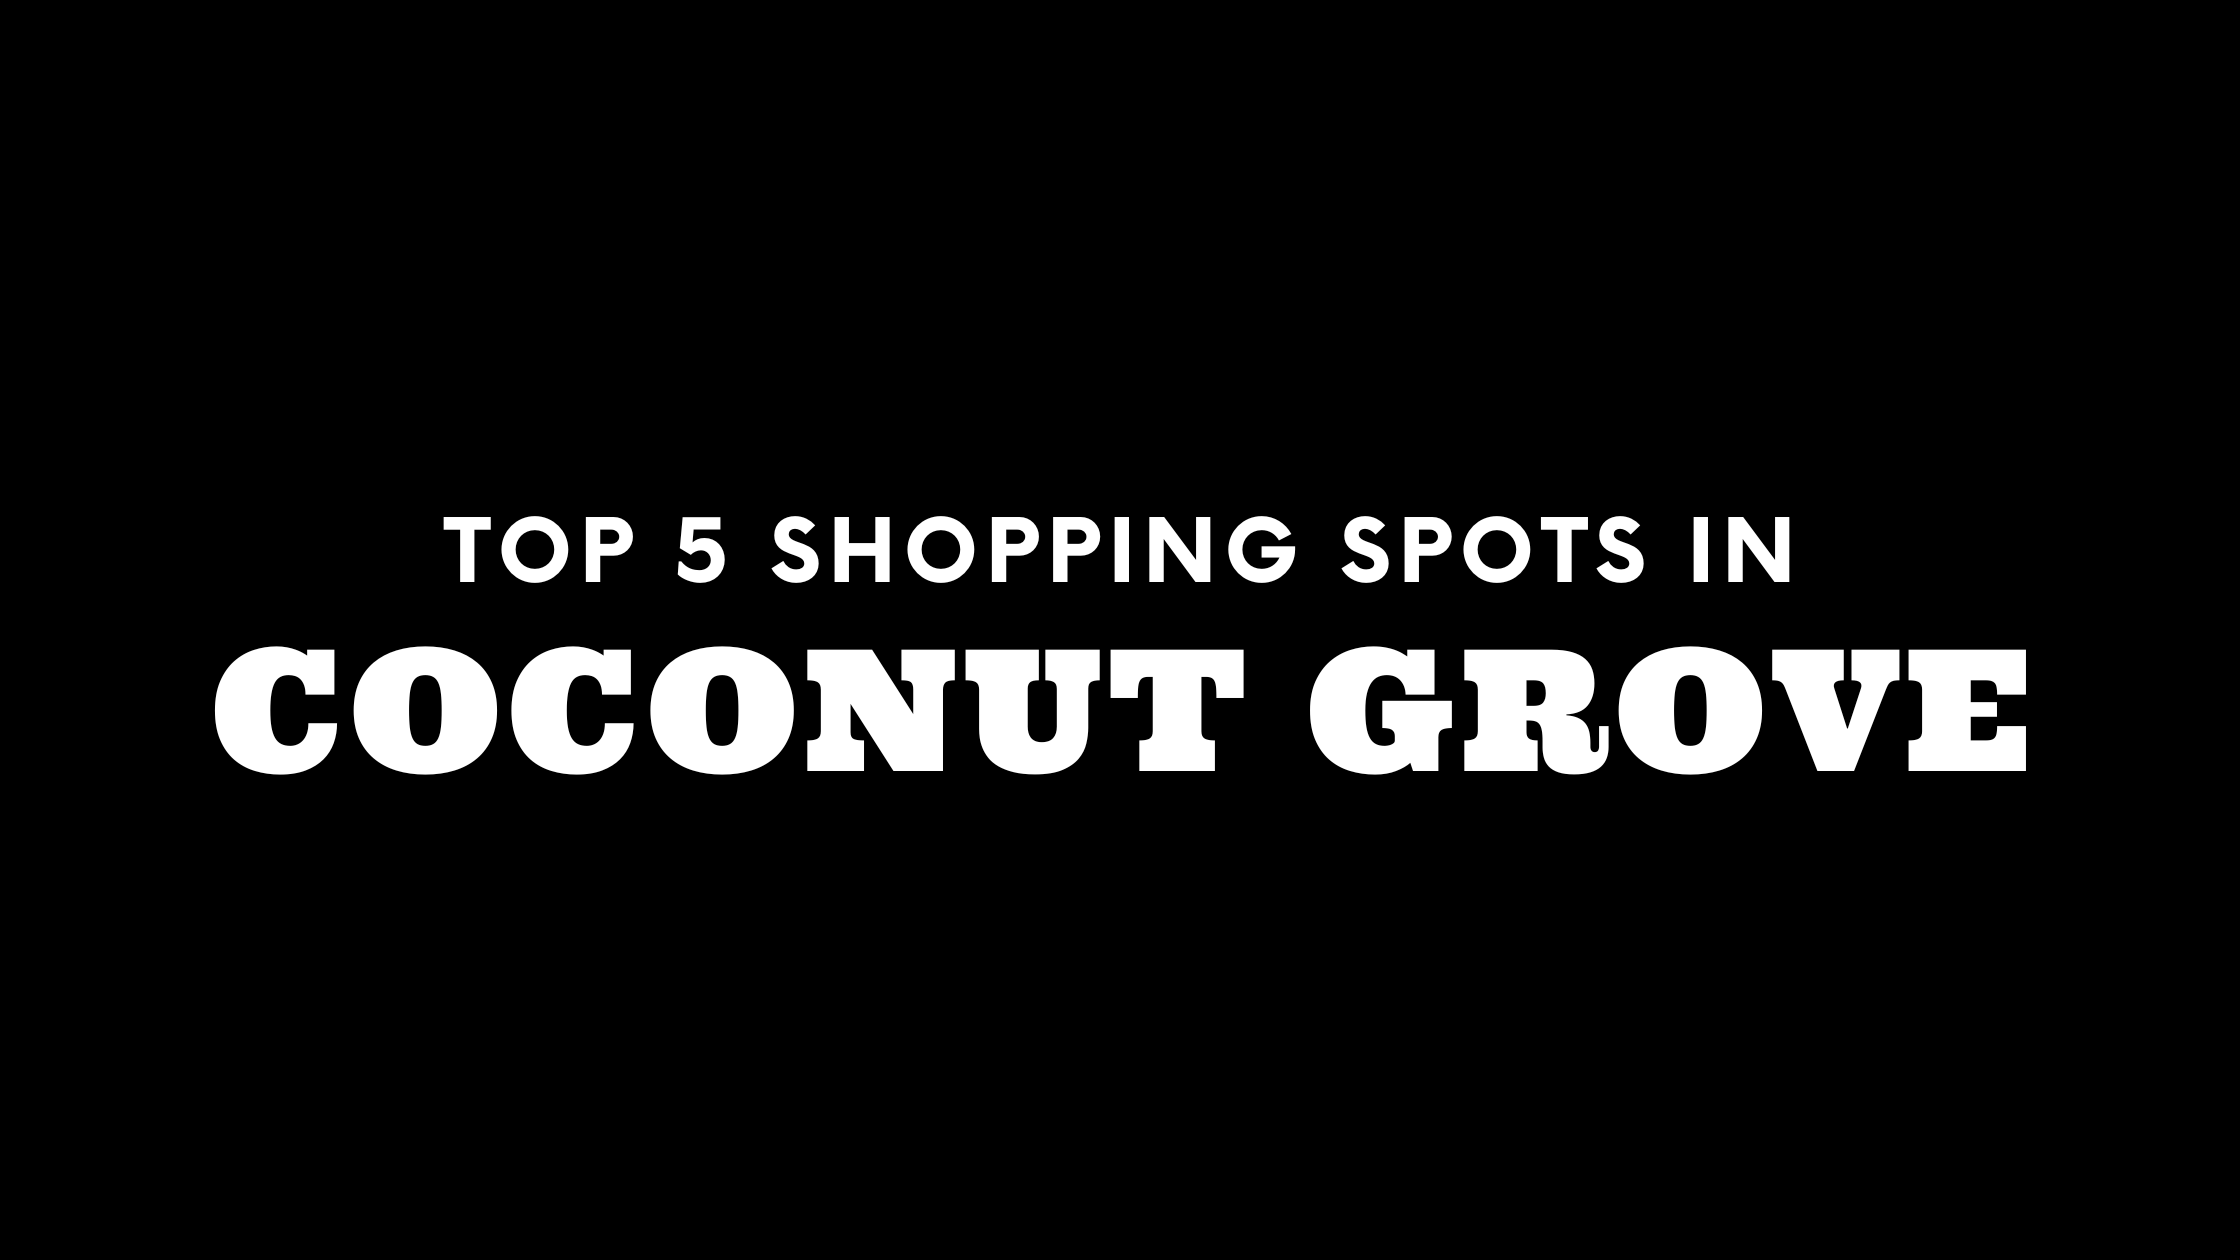 Top 5 Shopping Spots in Coconut Grove